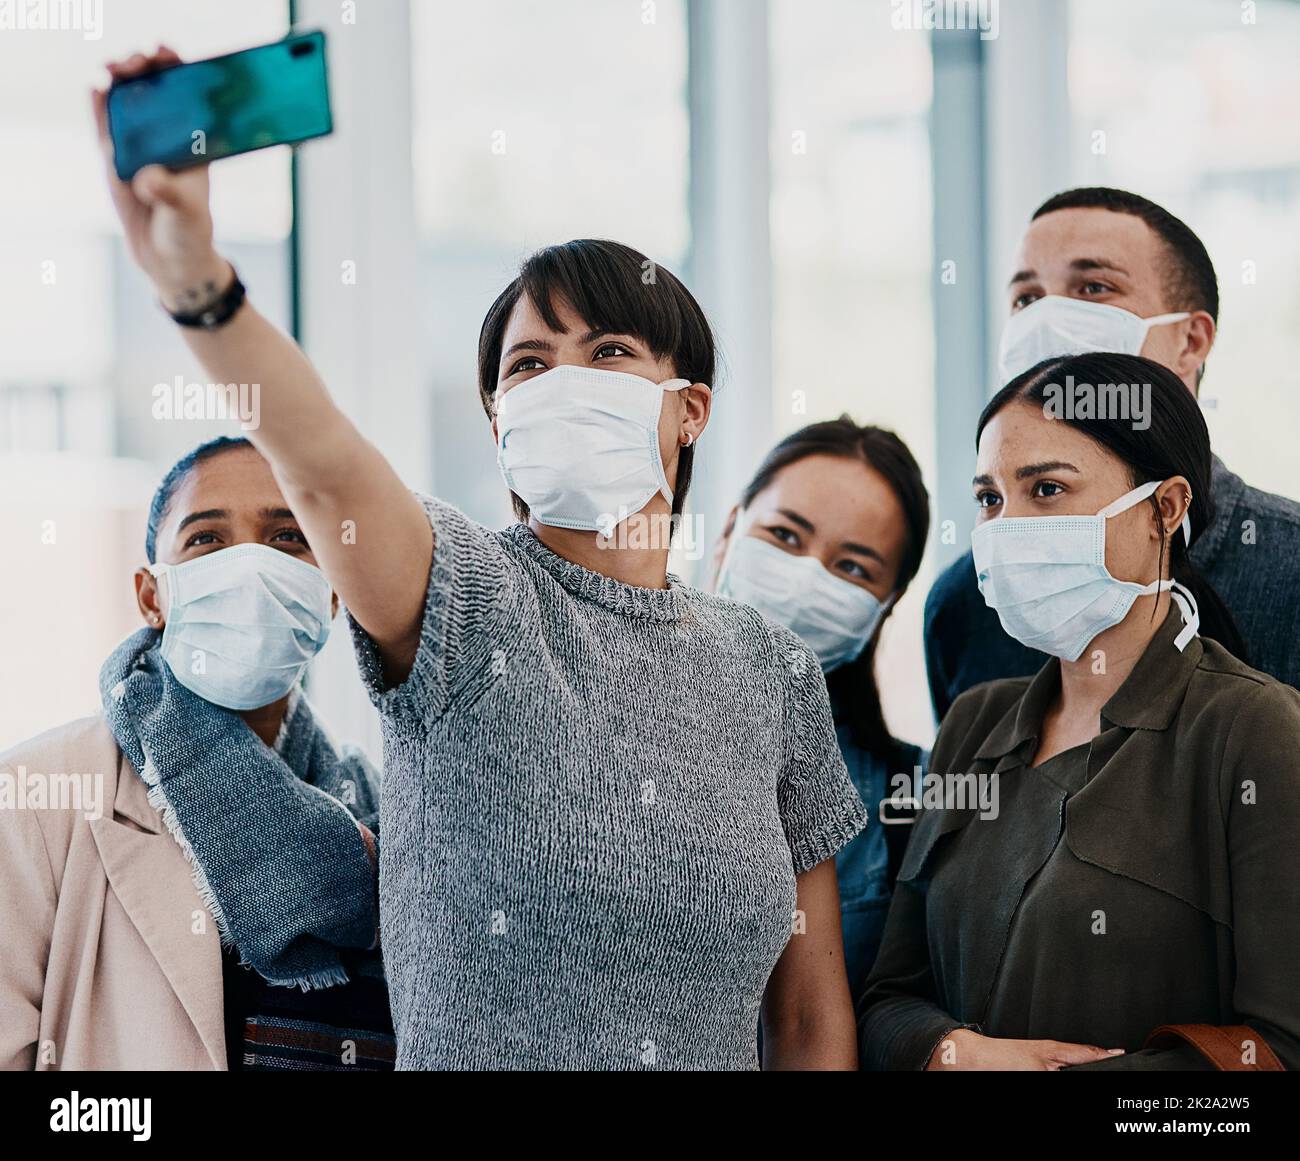 Embrace a new normal. Shot of a group of young people wearing masks and taking selfies at the airport. Stock Photo